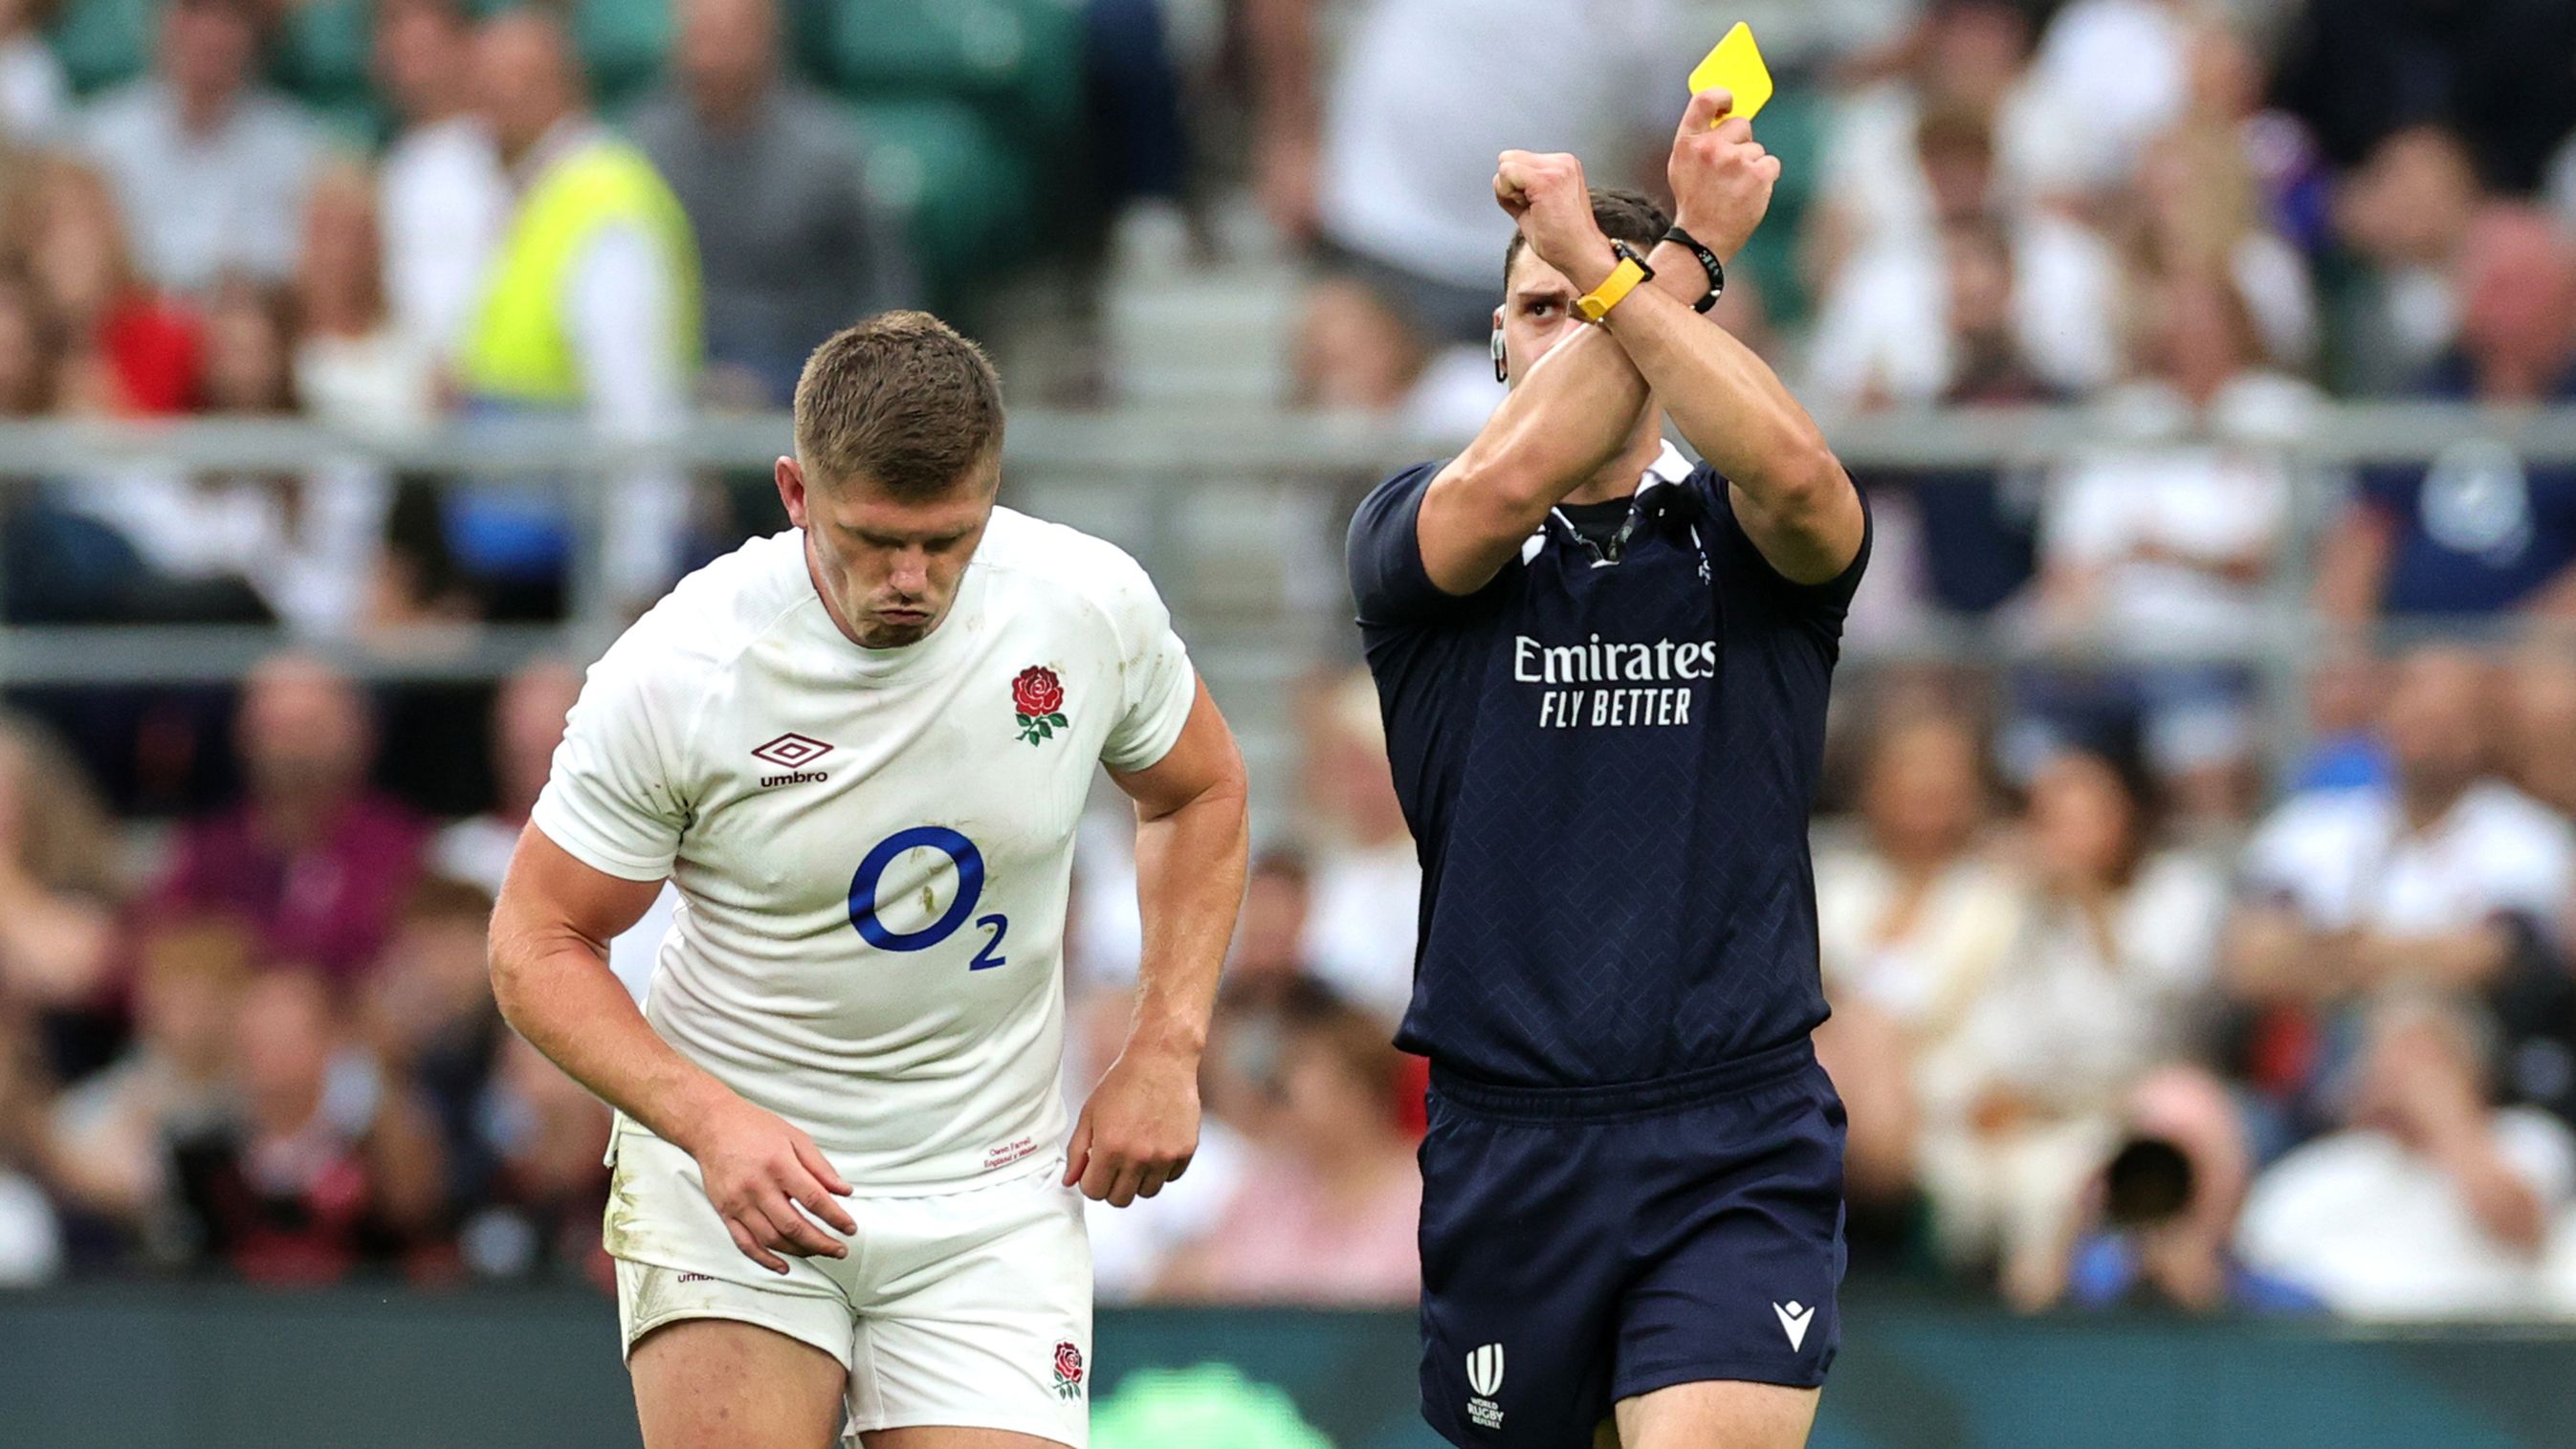 Owen Farrell receives a yellow card from referee Nika Amashukeli after a high tackle on Taine Basham of Wales.